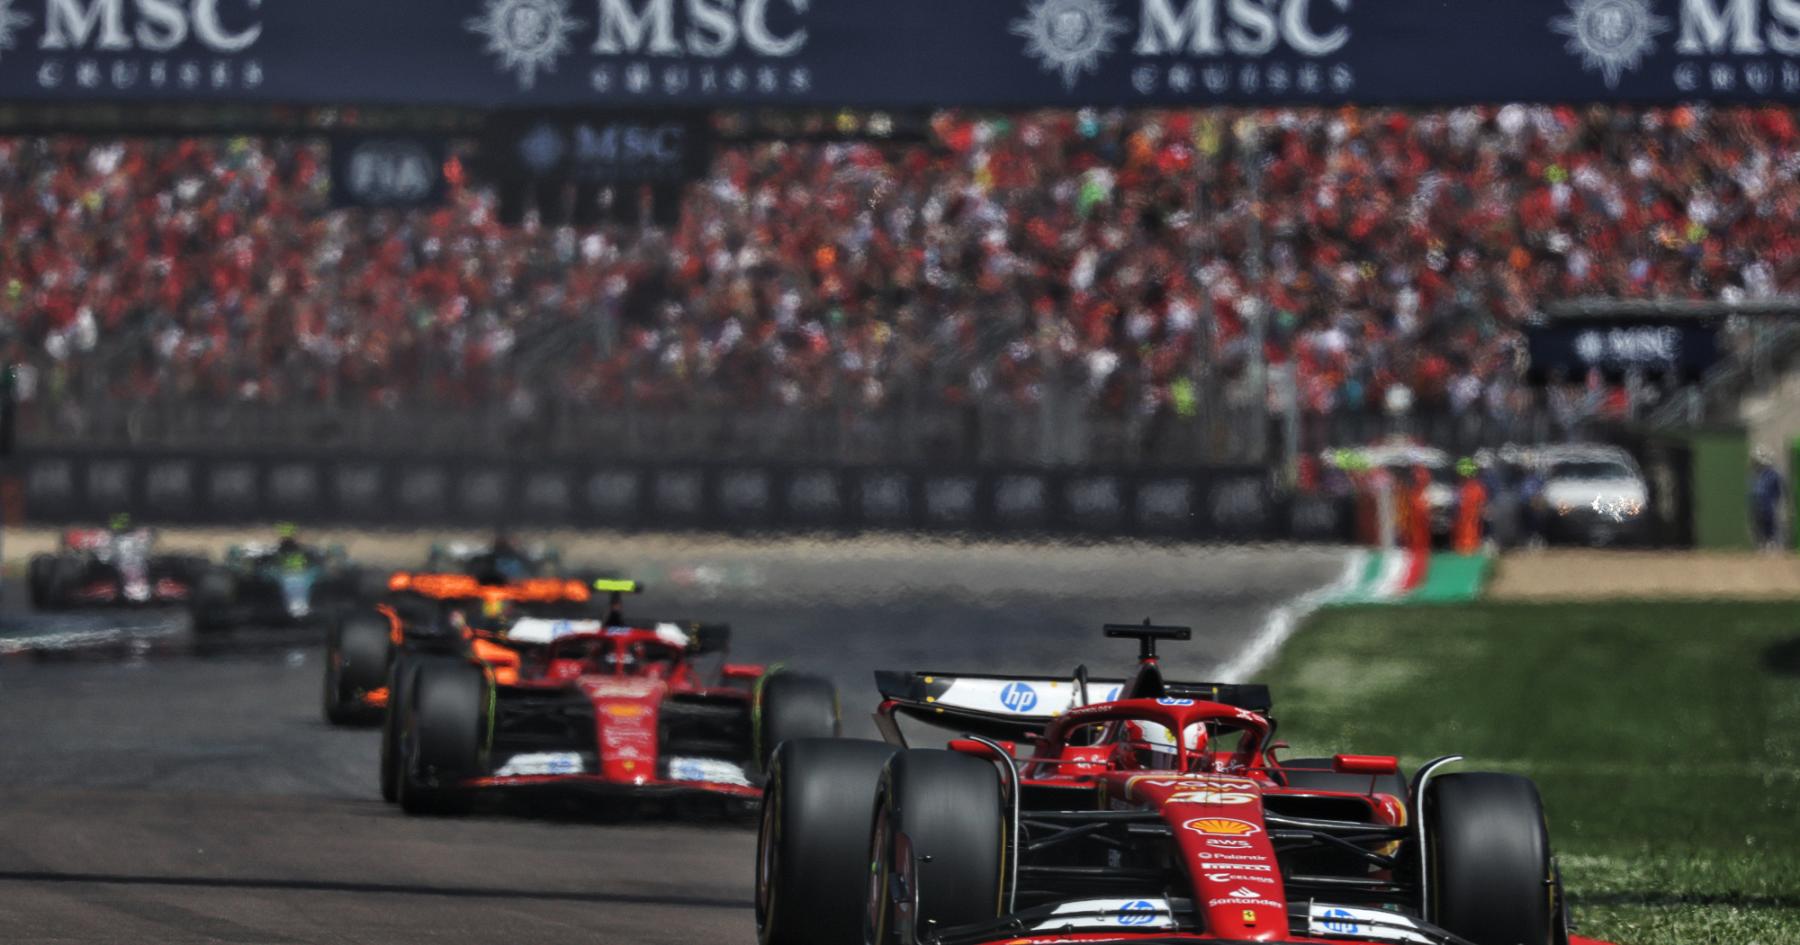 Revving Towards Success: Ferrari's Bold Strategy to Close the Gap with Red Bull